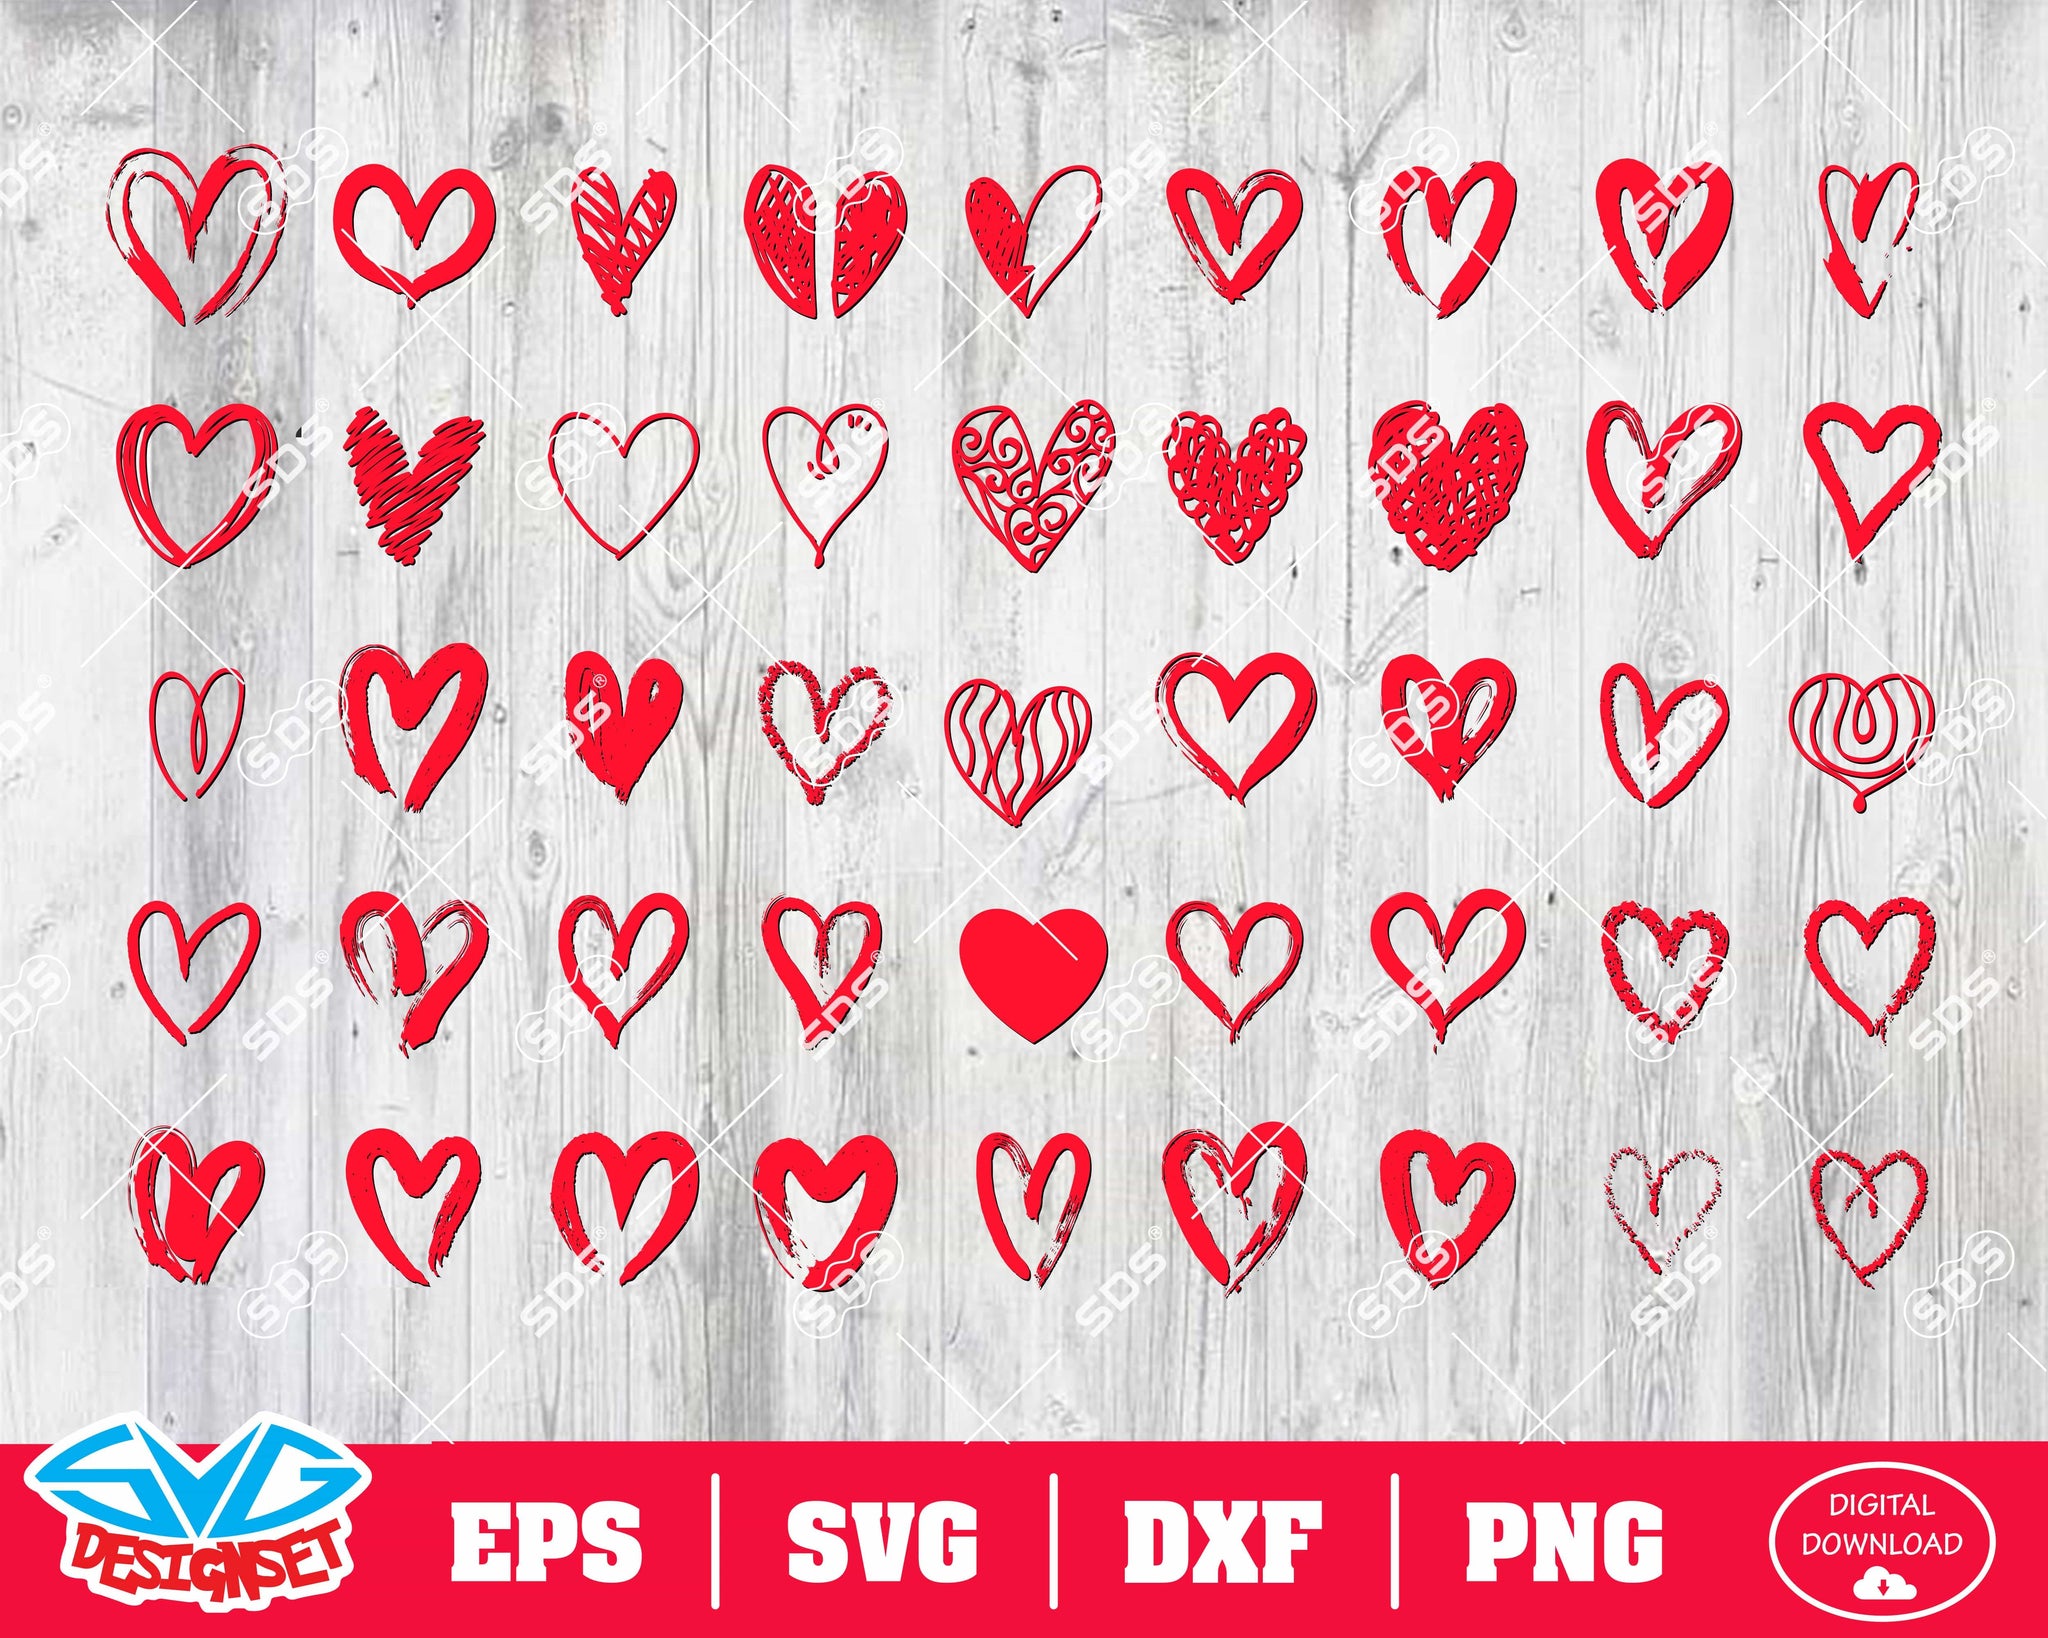 Heart Svg, Dxf, Eps, Png, Clipart, Silhouette and Cutfiles #3 - SVGDesignSets